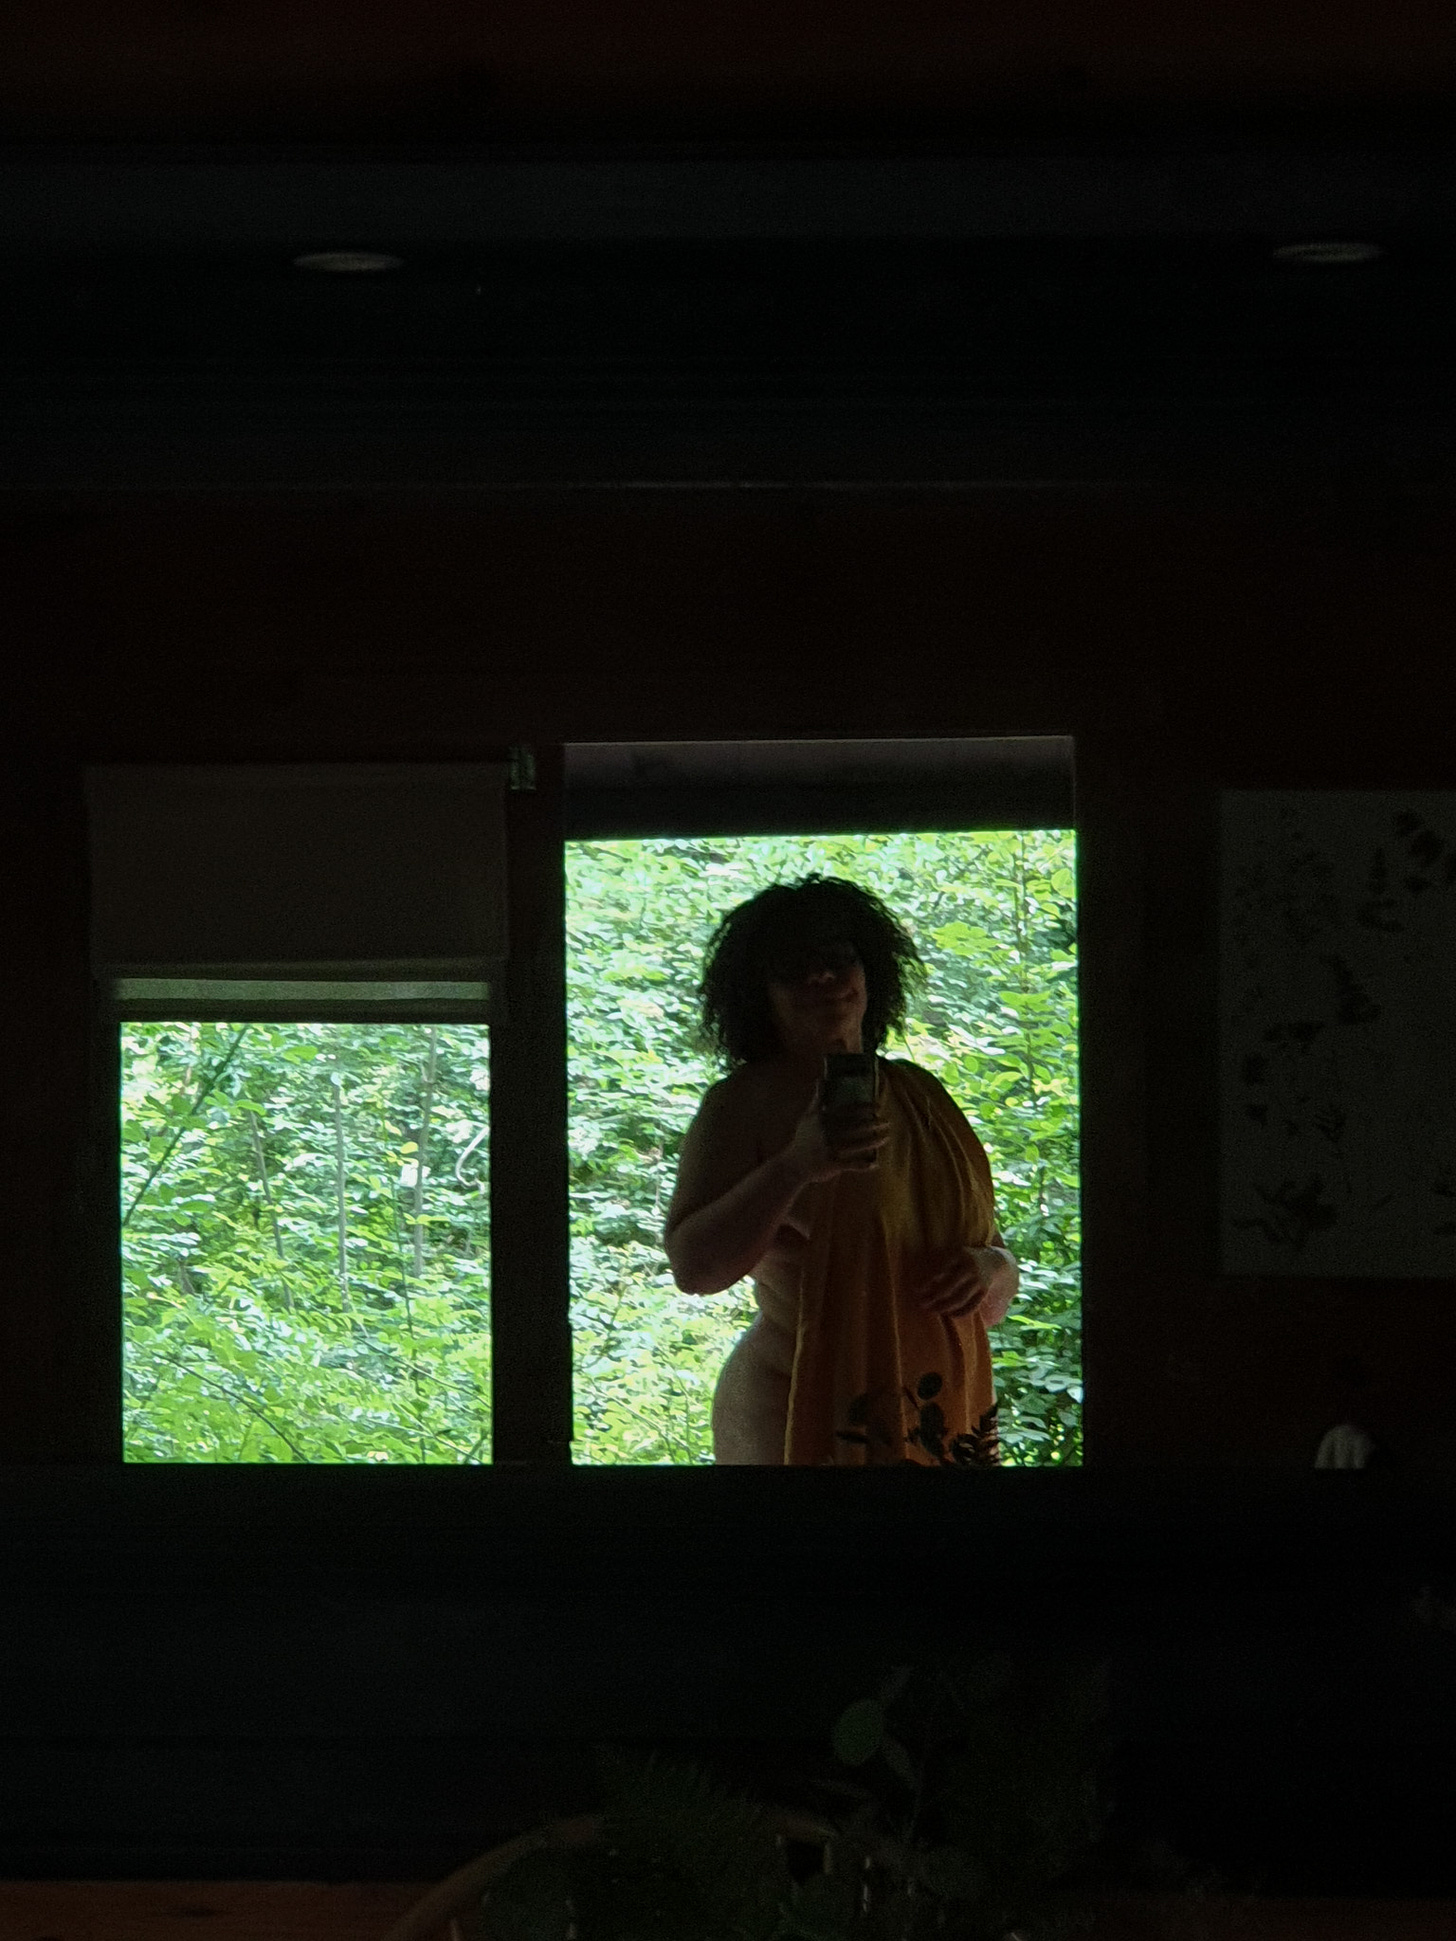 Photo of a woman taken through a window, she is naked but covered by a throw.